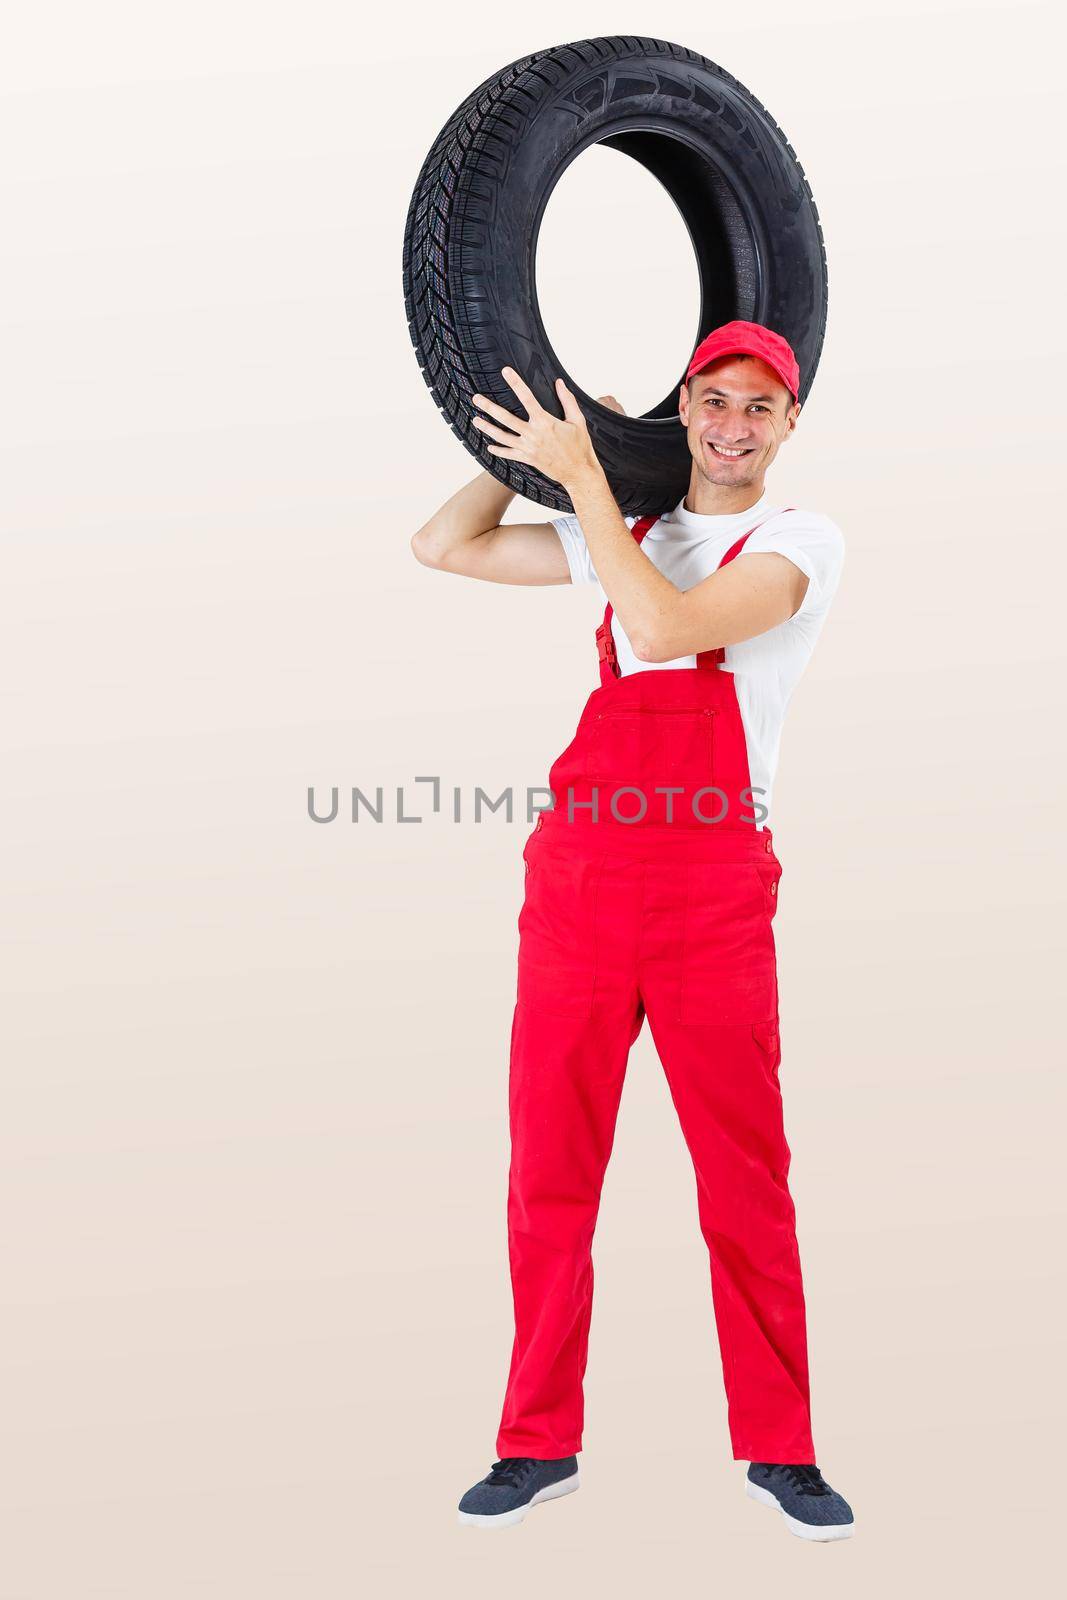 working man in full growth holds a tire on a white background